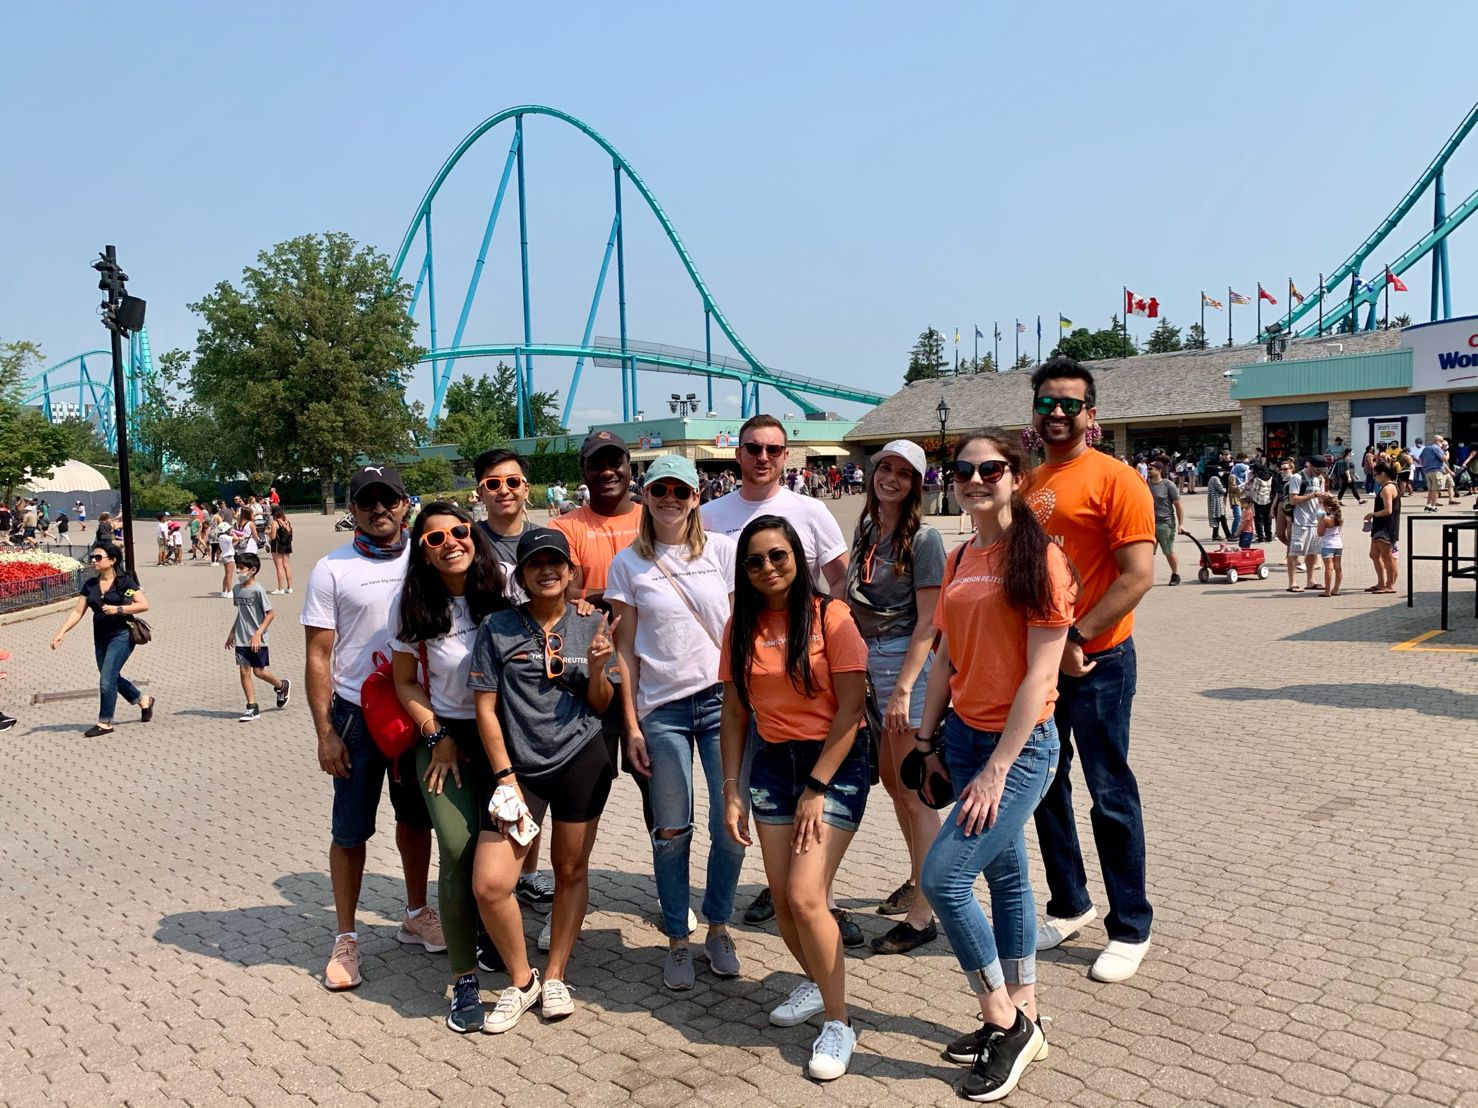 Thomson Reuters interns on a social work trip to Canada's Wonderland